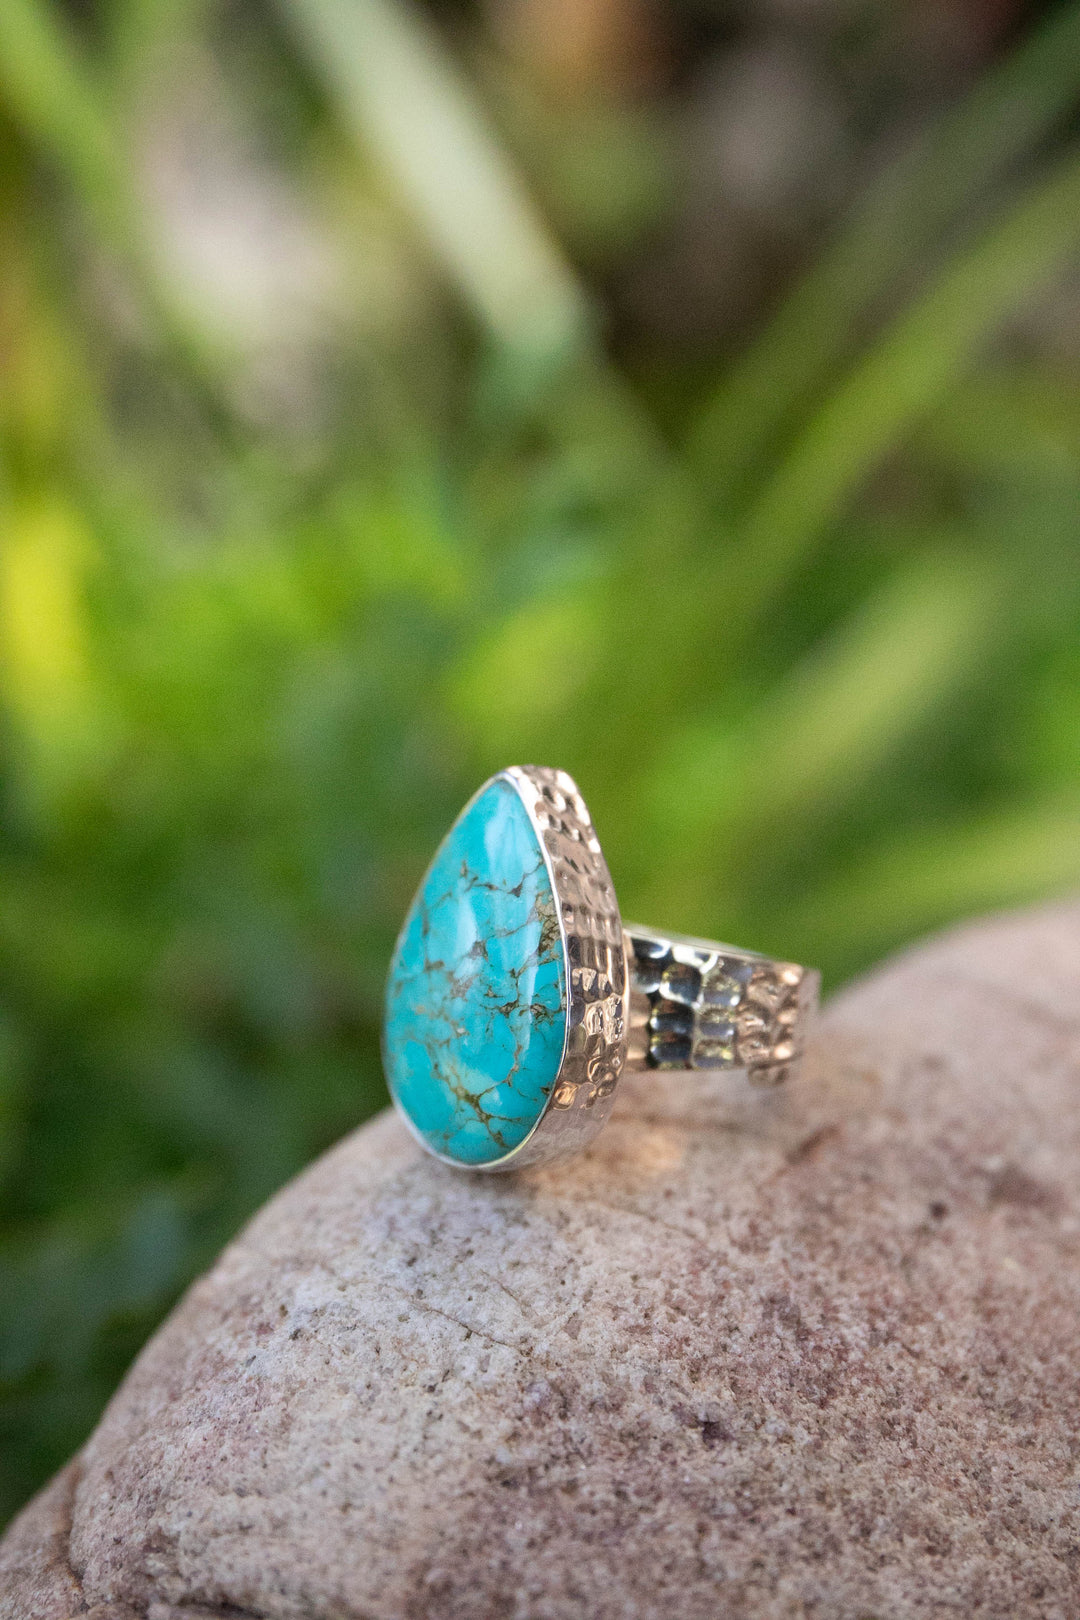 Teardrop Arizona Turquoise Ring in Adjustable Sterling Silver Band